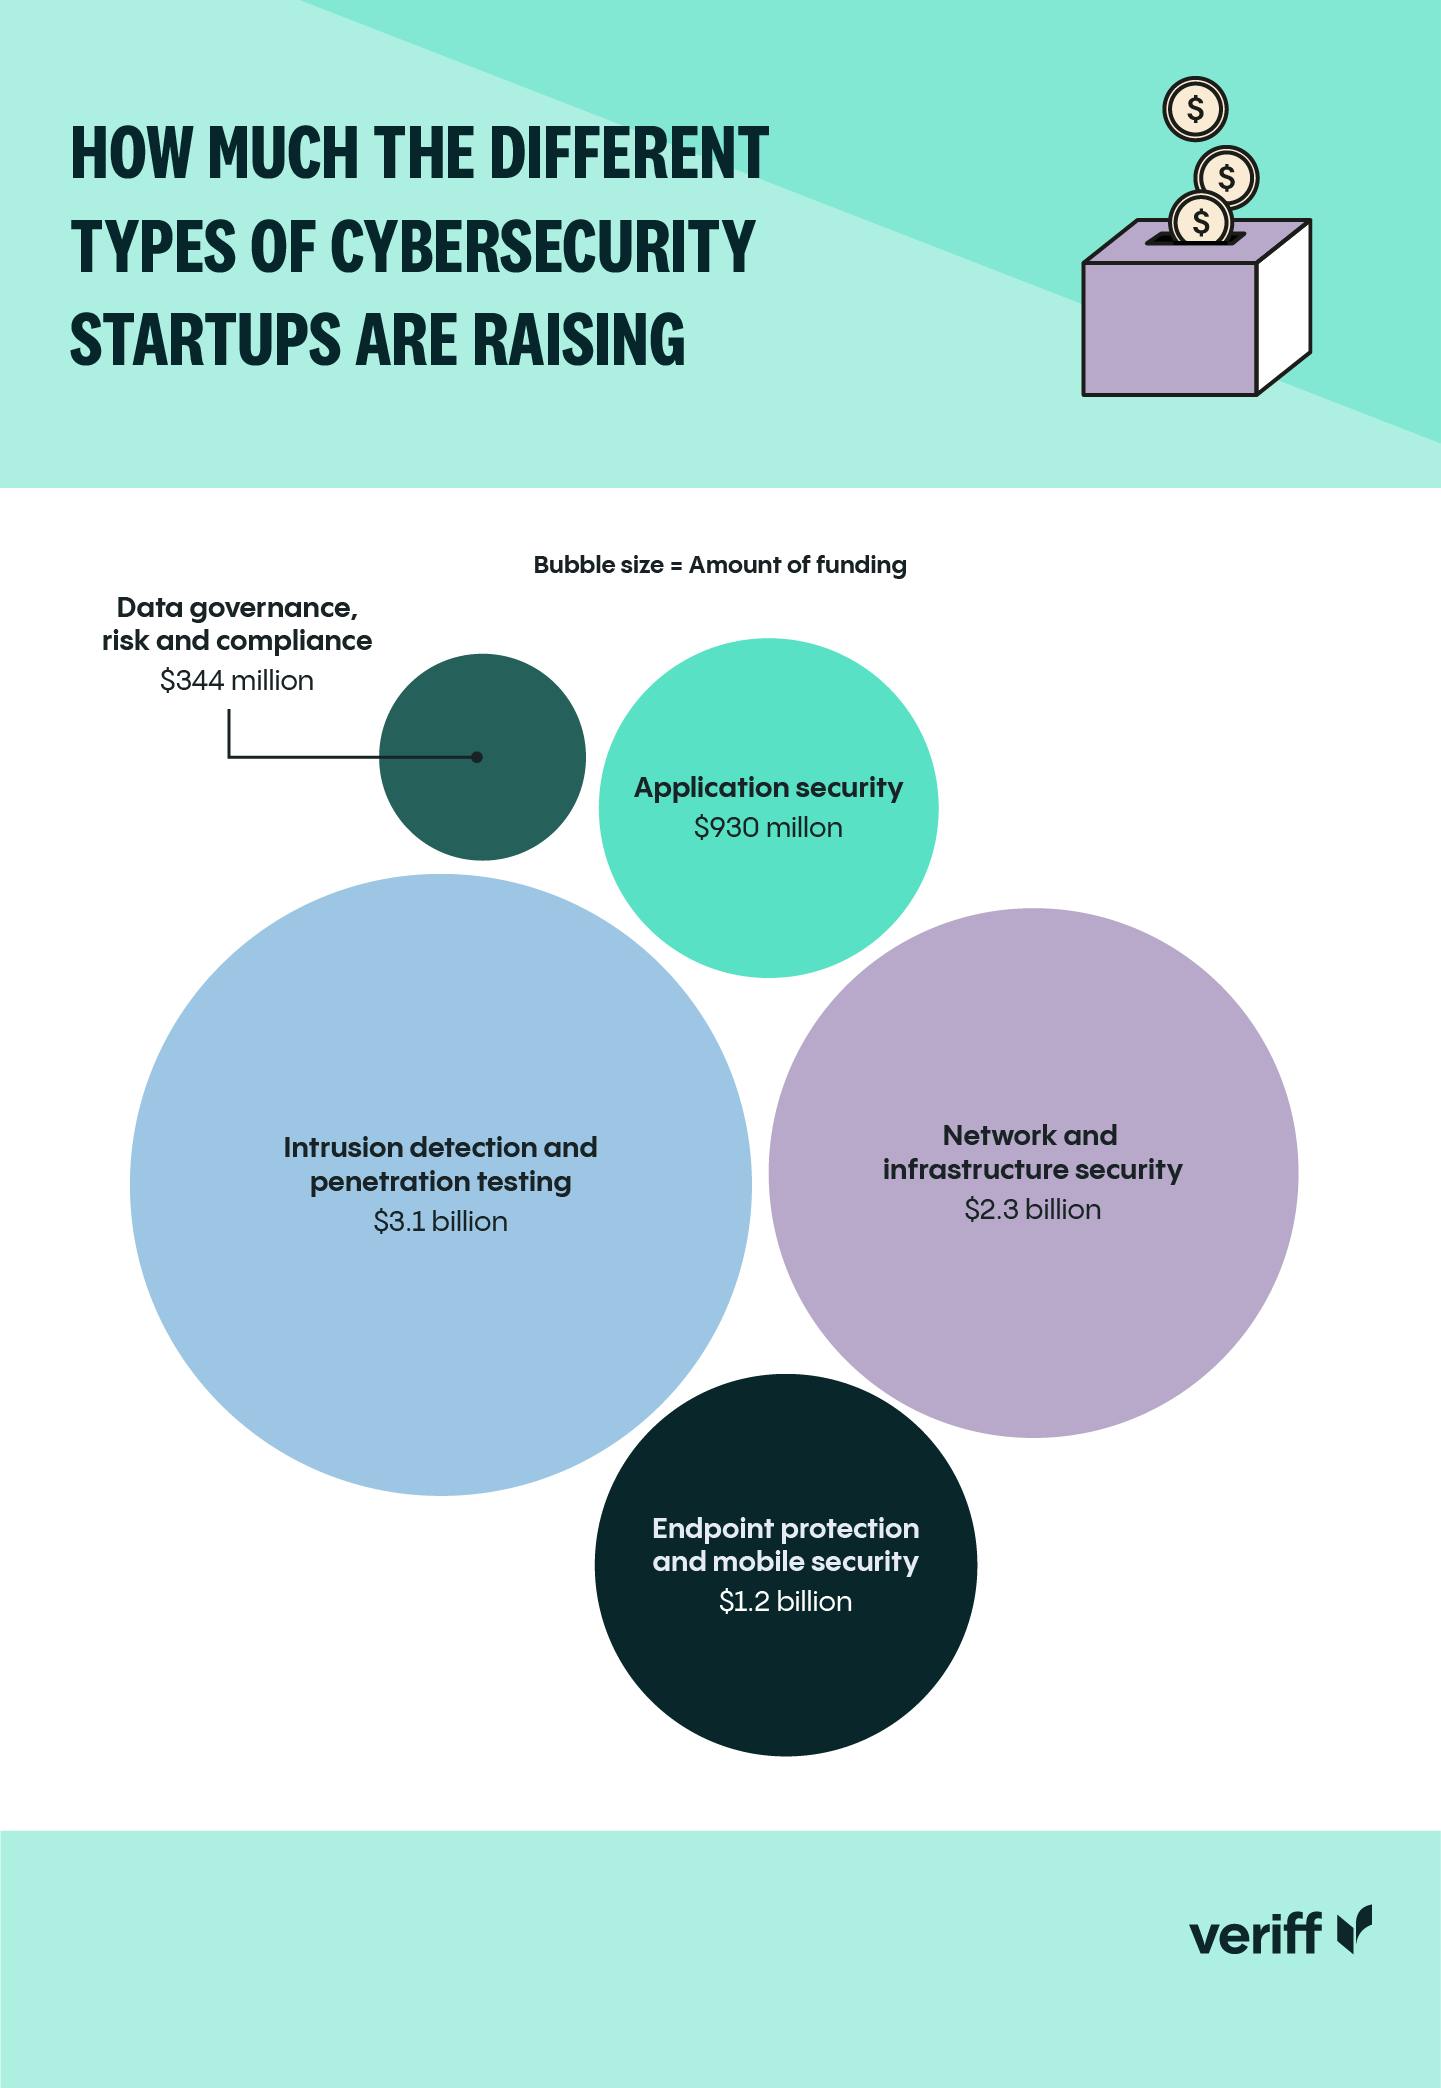 Bubble graphic showing how much different types of cybersecurity startups are raising in funding.